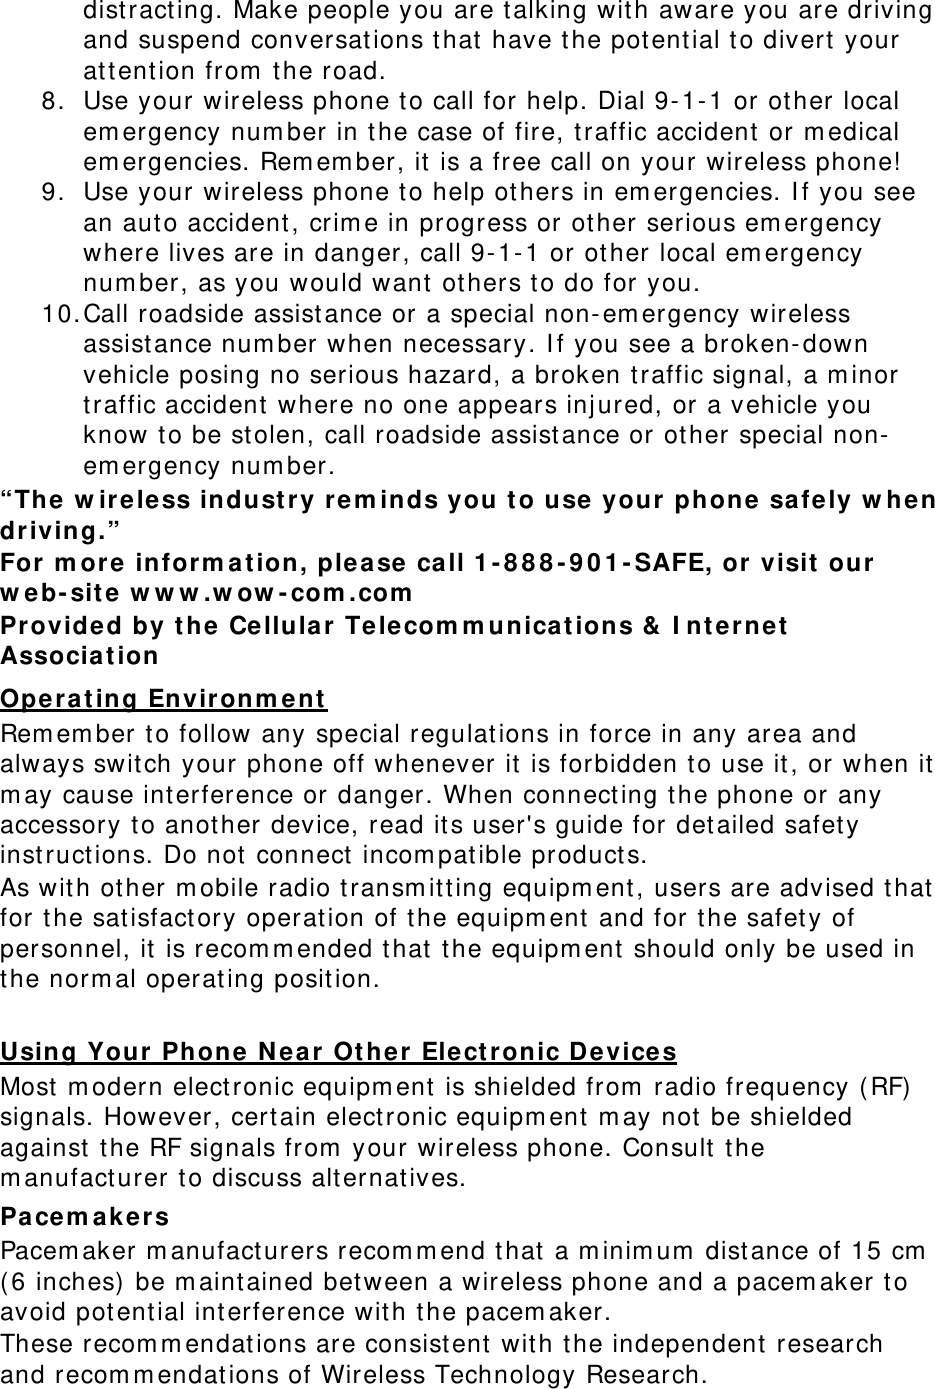 dist ract ing. Make people you are t alking with aware you are driving and suspend conversations t hat have t he potent ial to divert  your at tent ion from  t he road. 8. Use your wireless phone t o call for help. Dial 9- 1- 1 or ot her local em ergency num ber in t he case of fire, t raffic accident  or m edical em ergencies. Rem em ber, it is a free call on your wireless phone! 9. Use your wireless phone to help ot hers in em ergencies. I f you see an aut o accident, crim e in progress or other serious em ergency where lives are in danger, call 9- 1- 1 or ot her local em ergency num ber, as you would want  others t o do for you. 10. Call roadside assist ance or a special non- em ergency wireless assist ance num ber when necessary. I f you see a broken- down vehicle posing no serious hazard, a broken t raffic signal, a m inor traffic accident  where no one appears inj ured, or a vehicle you know t o be stolen, call roadside assistance or other special non-em ergency num ber. “The w ir eless in dust ry rem inds you t o u se your phone  sa fe ly w hen driving.” For m ore  in form at ion, ple a se ca ll 1 - 8 8 8 - 9 0 1 - SAFE, or visit our  w e b- site w w w .w ow - com .com  Provided by t he  Cellula r Te le com m unicat ions &amp;  I nt ernet  Associa t ion  Ope r a t ing Environm e n t  Rem em ber t o follow any special regulations in force in any area and always swit ch your phone off whenever it is forbidden t o use it, or when it  m ay cause int erference or danger. When connect ing t he phone or any accessory to another device, read its user&apos;s guide for detailed safet y instructions. Do not connect  incom pat ible products. As with other m obile radio t ransm itt ing equipm ent, users are advised t hat for the sat isfactory operat ion of t he equipm ent  and for t he safety of personnel, it is recom m ended t hat t he equipm ent  should only be used in the norm al operating posit ion. Using Your  Phone  N e a r Ot he r  Ele ctronic D e vices Most  m odern elect ronic equipm ent  is shielded from  radio frequency ( RF) signals. However, cert ain elect ronic equipm ent  m ay not be shielded against t he RF signals from  your wireless phone. Consult t he m anufact urer t o discuss alt ernatives. Pacem akers Pacem aker m anufact urers recom m end t hat a m inim um  dist ance of 15 cm  ( 6 inches)  be m aintained between a wireless phone and a pacem aker t o avoid potential interference with t he pacem aker. These recom m endat ions are consist ent  wit h t he independent  research and recom m endations of Wireless Technology Research. 